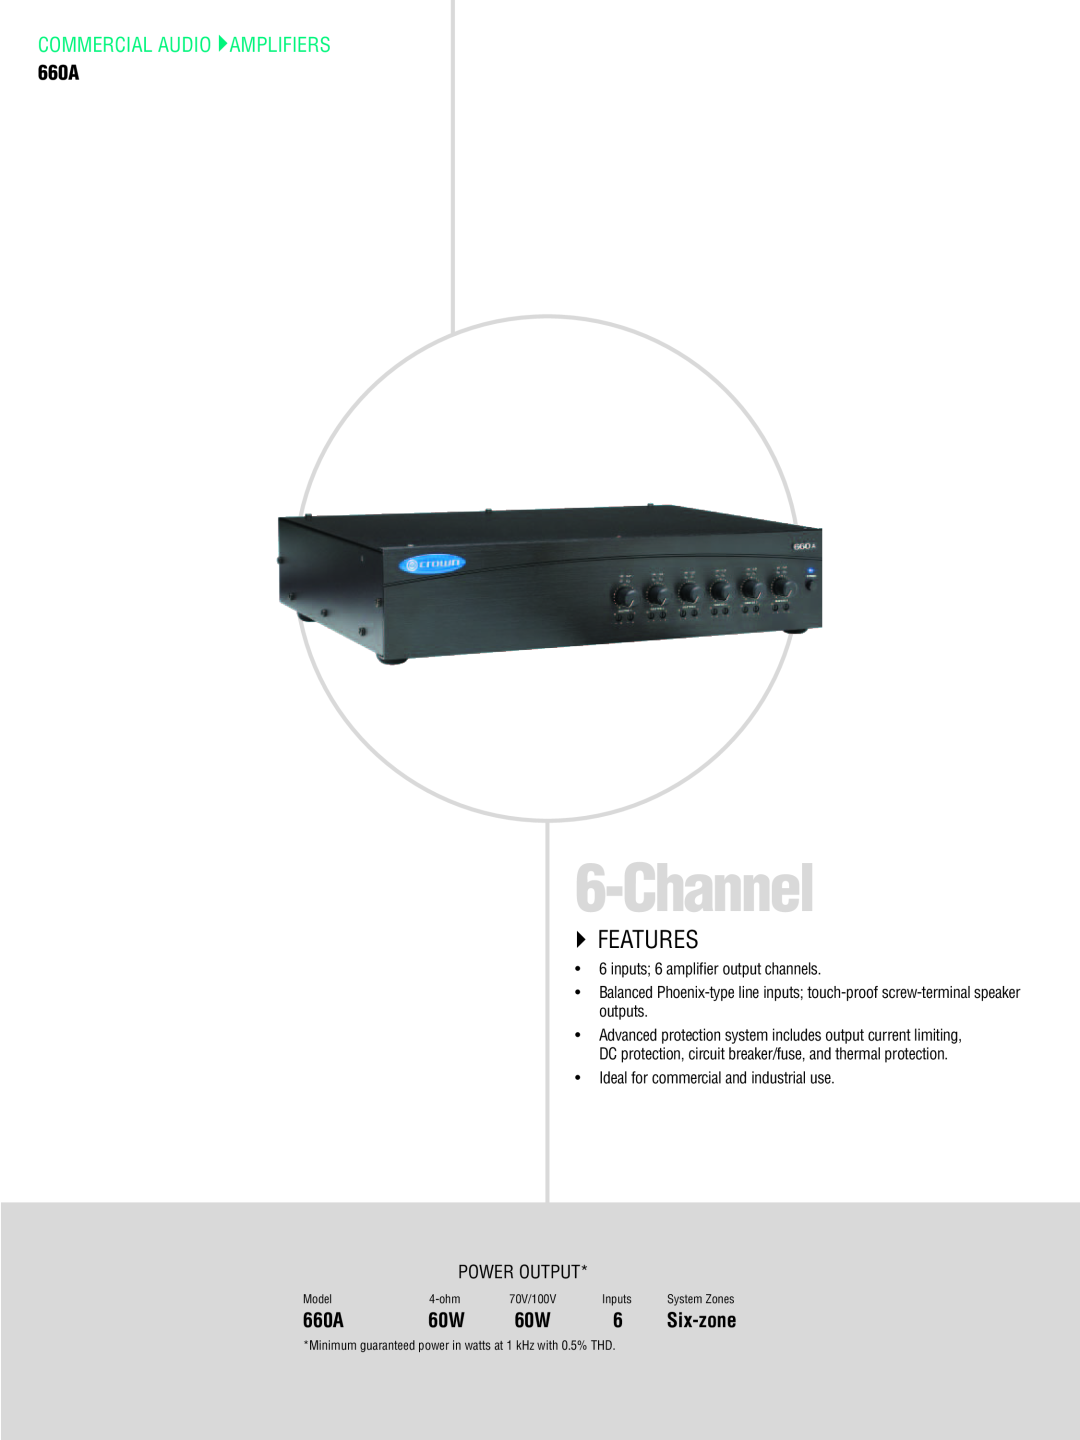 Crown CTS 3000, CTS 2000, CTS 1200 Channel, `` Features, Commercial Audio Amplifiers, Power Output, System Zones, 70V/100V 